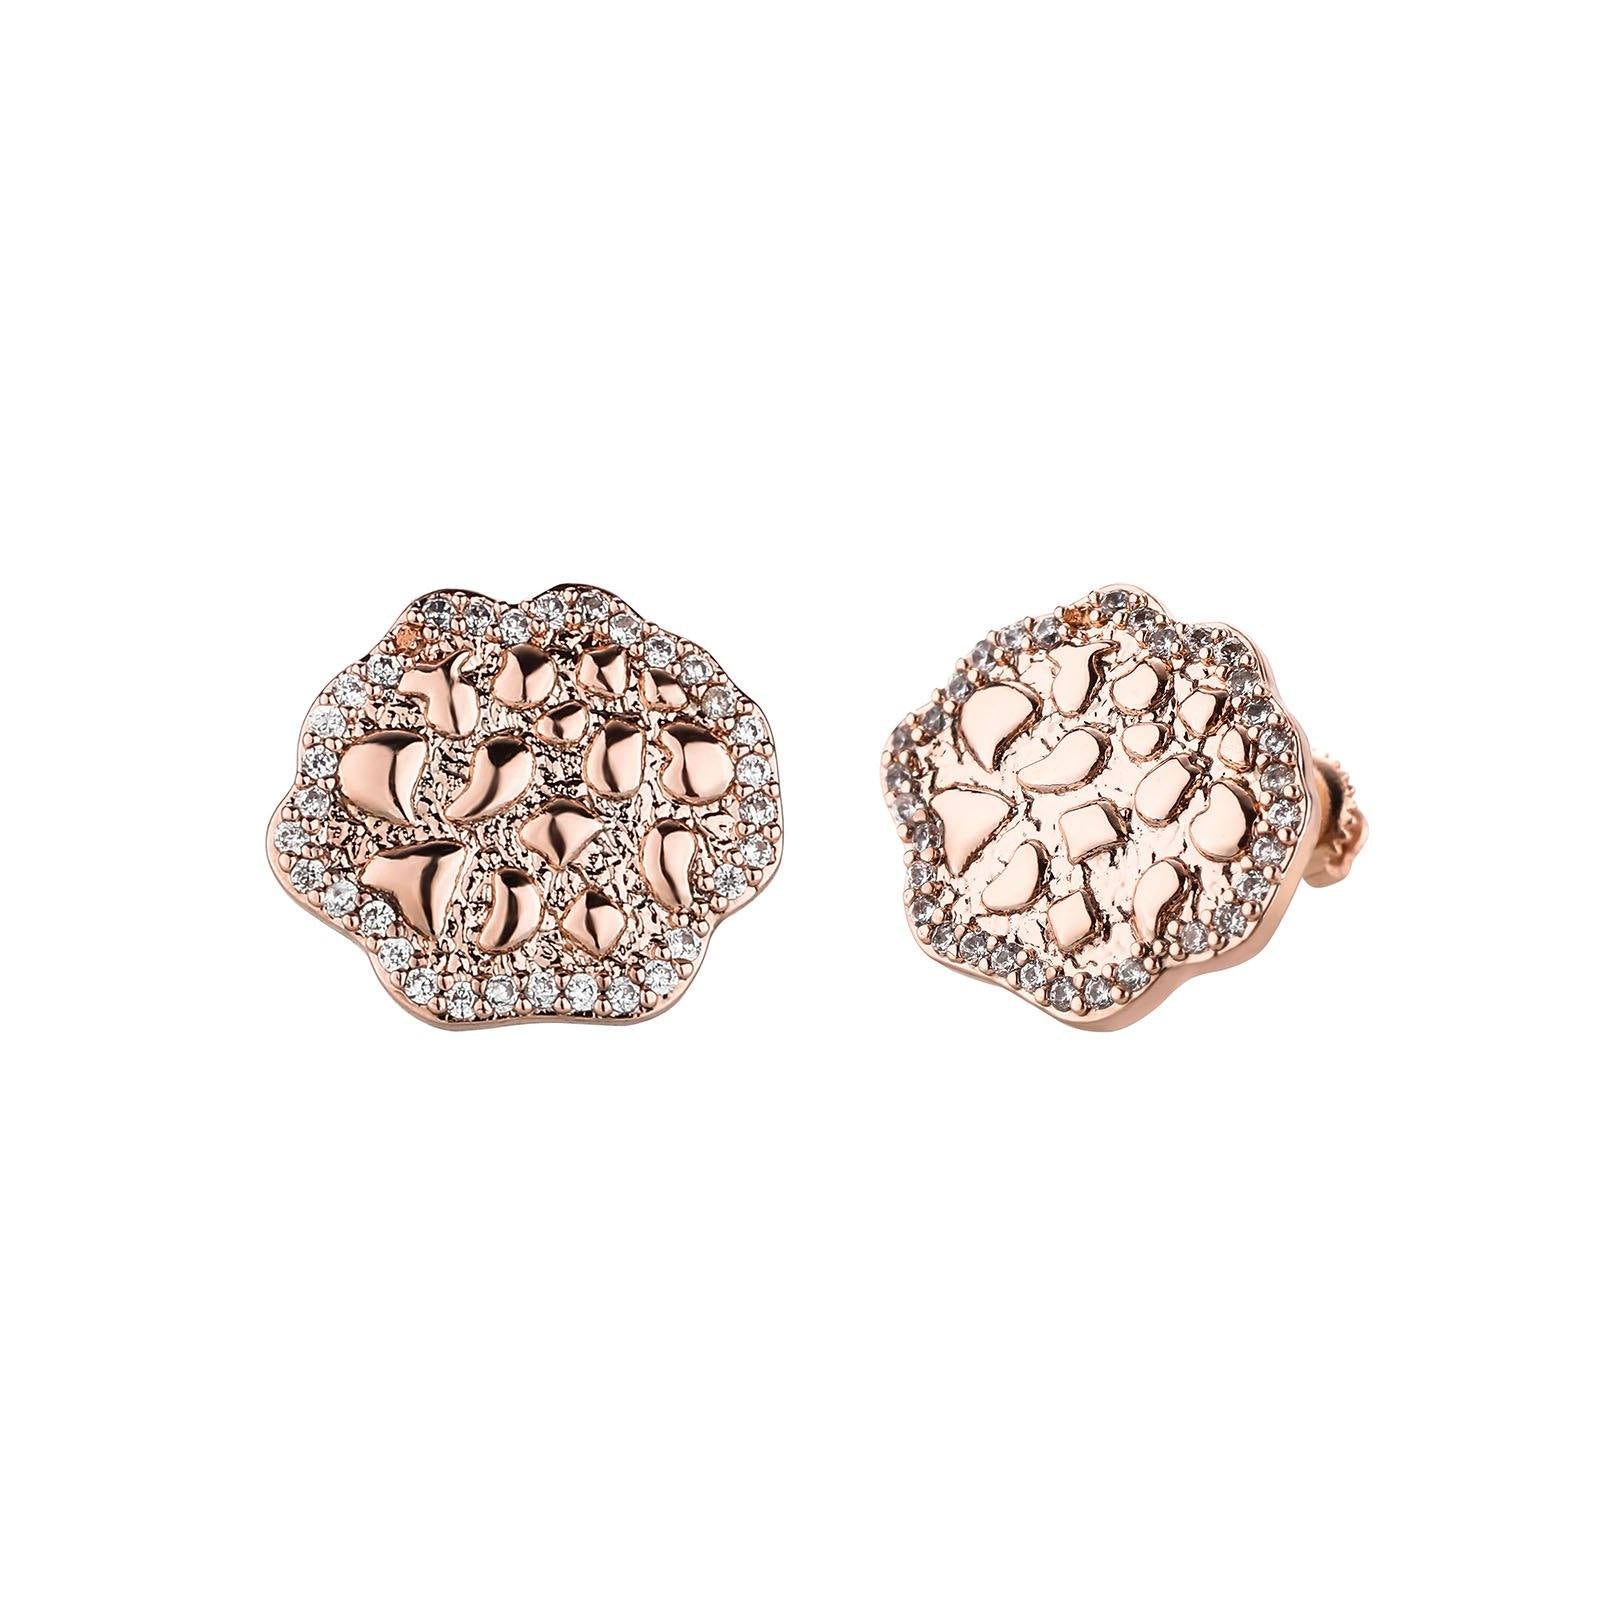 Iced Flowers Earrings - Rose Gold - Alliceonyou